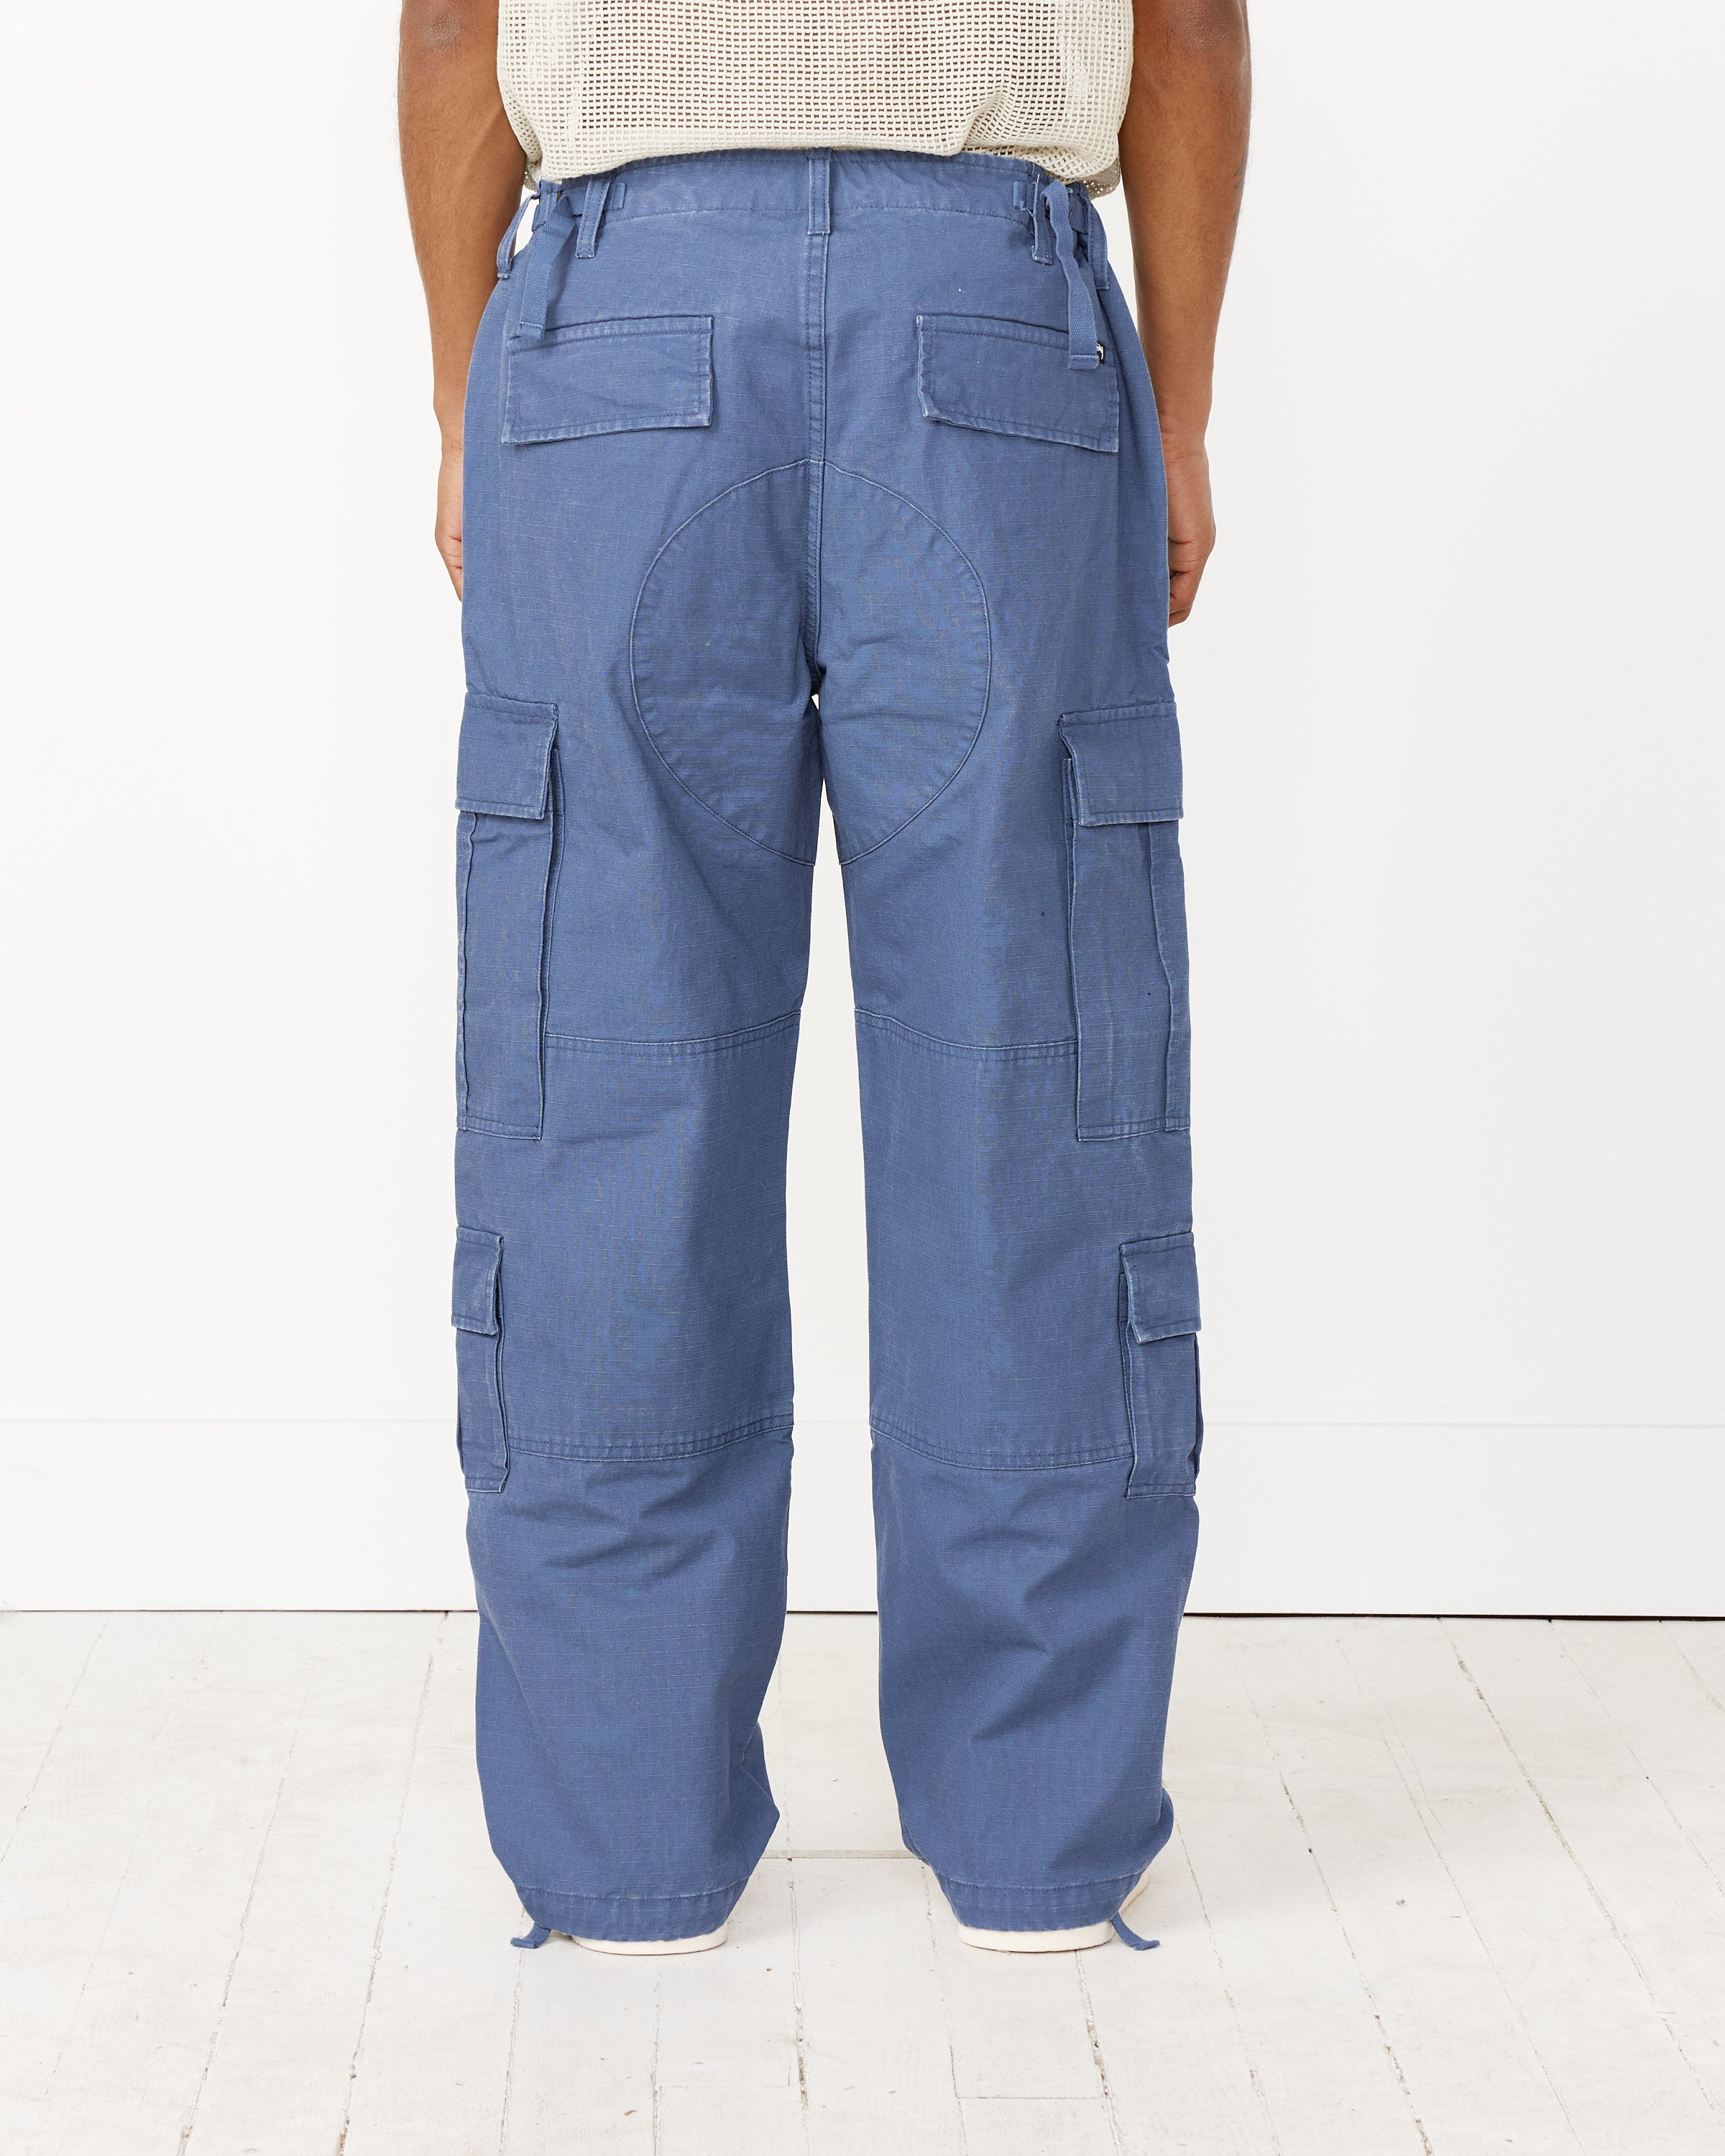 Ripstop Surplus Cargo in Washed Blue